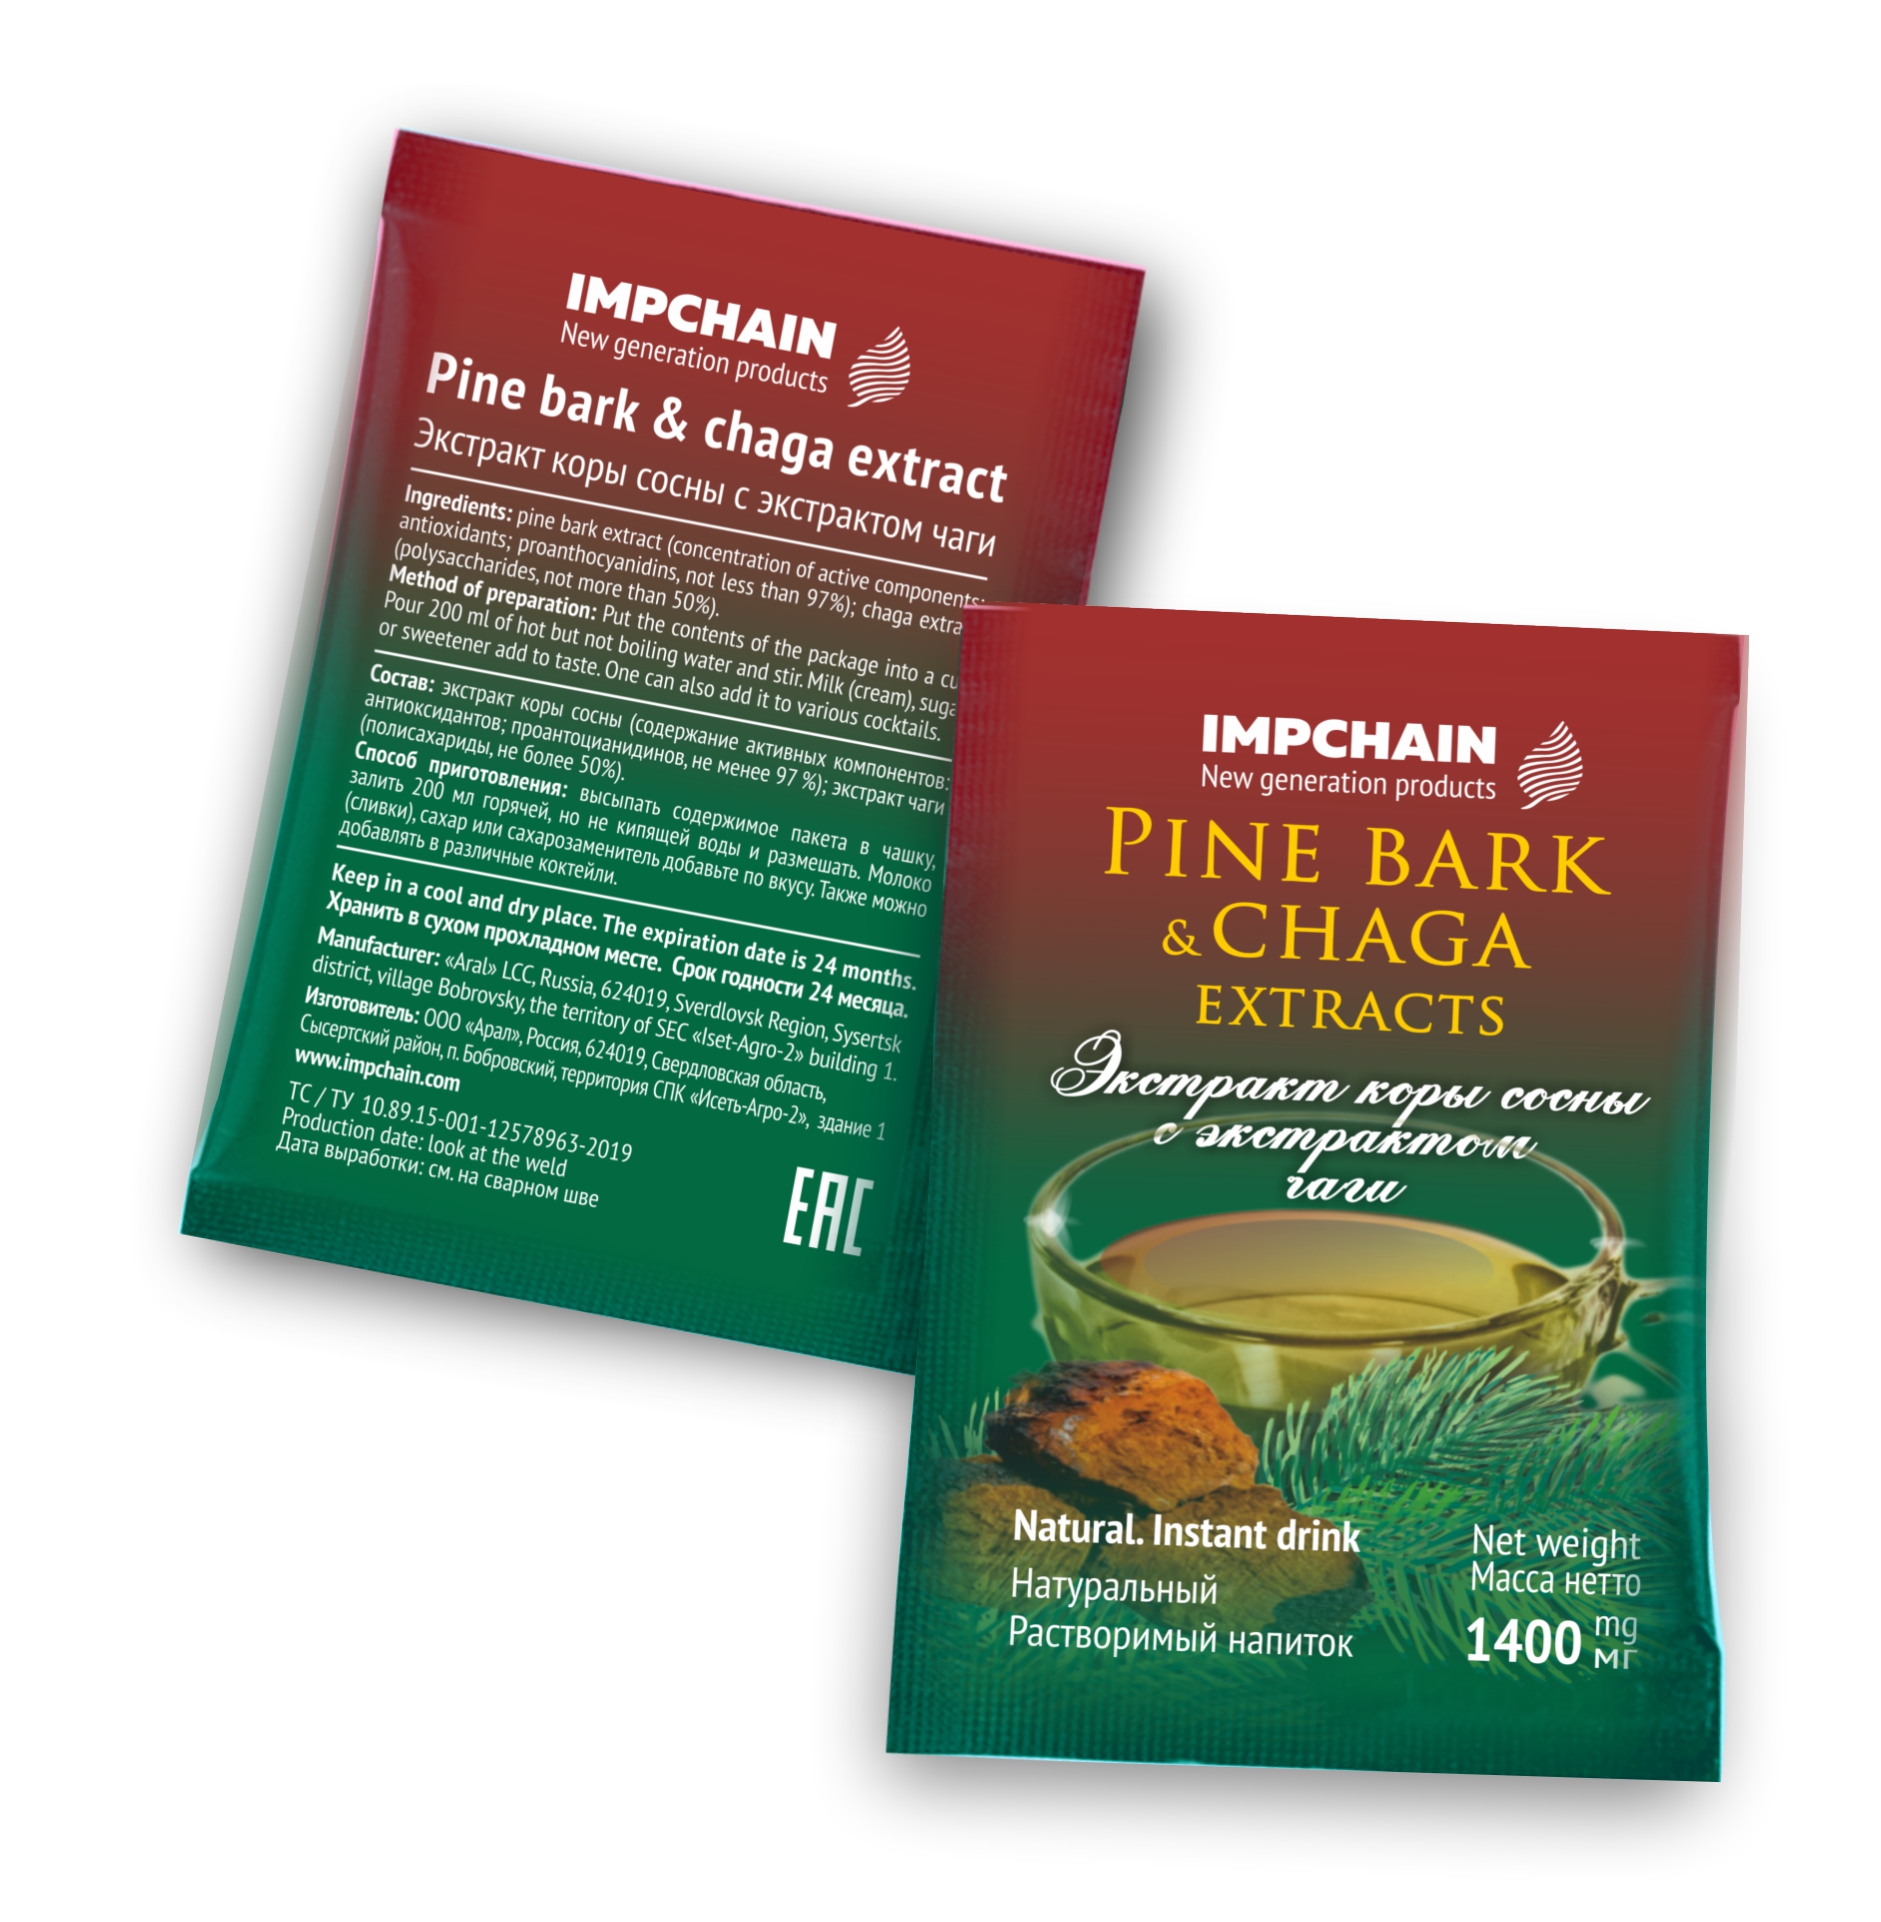 Pine bark extract with chaga extract. Instant drink. The price is indicated for the 1st package. The price of a bag is 20 rubles.